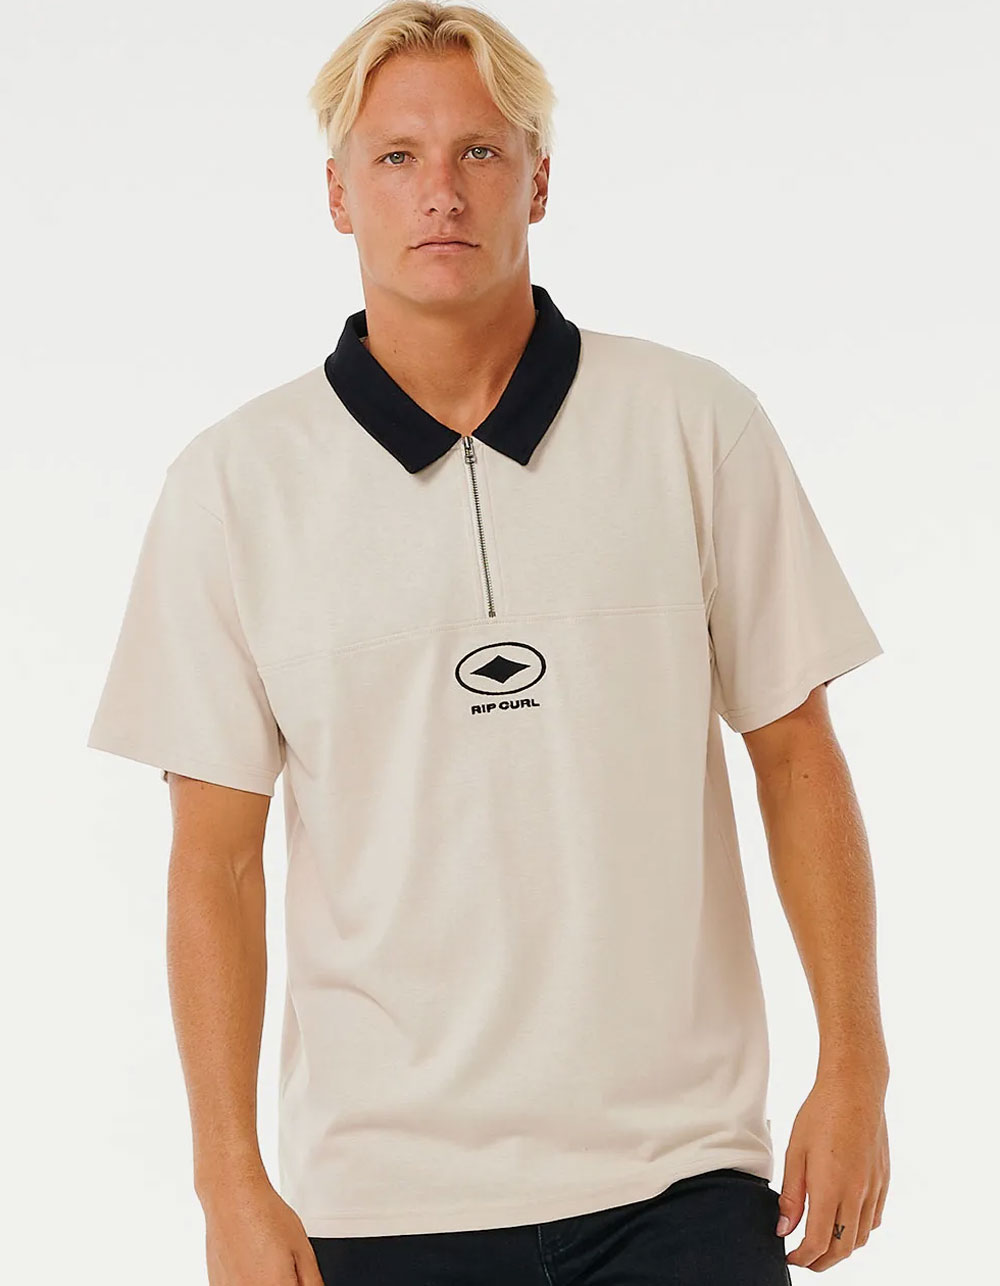 RIP CURL Quality Surf Products Mens Quarter Zip Polo